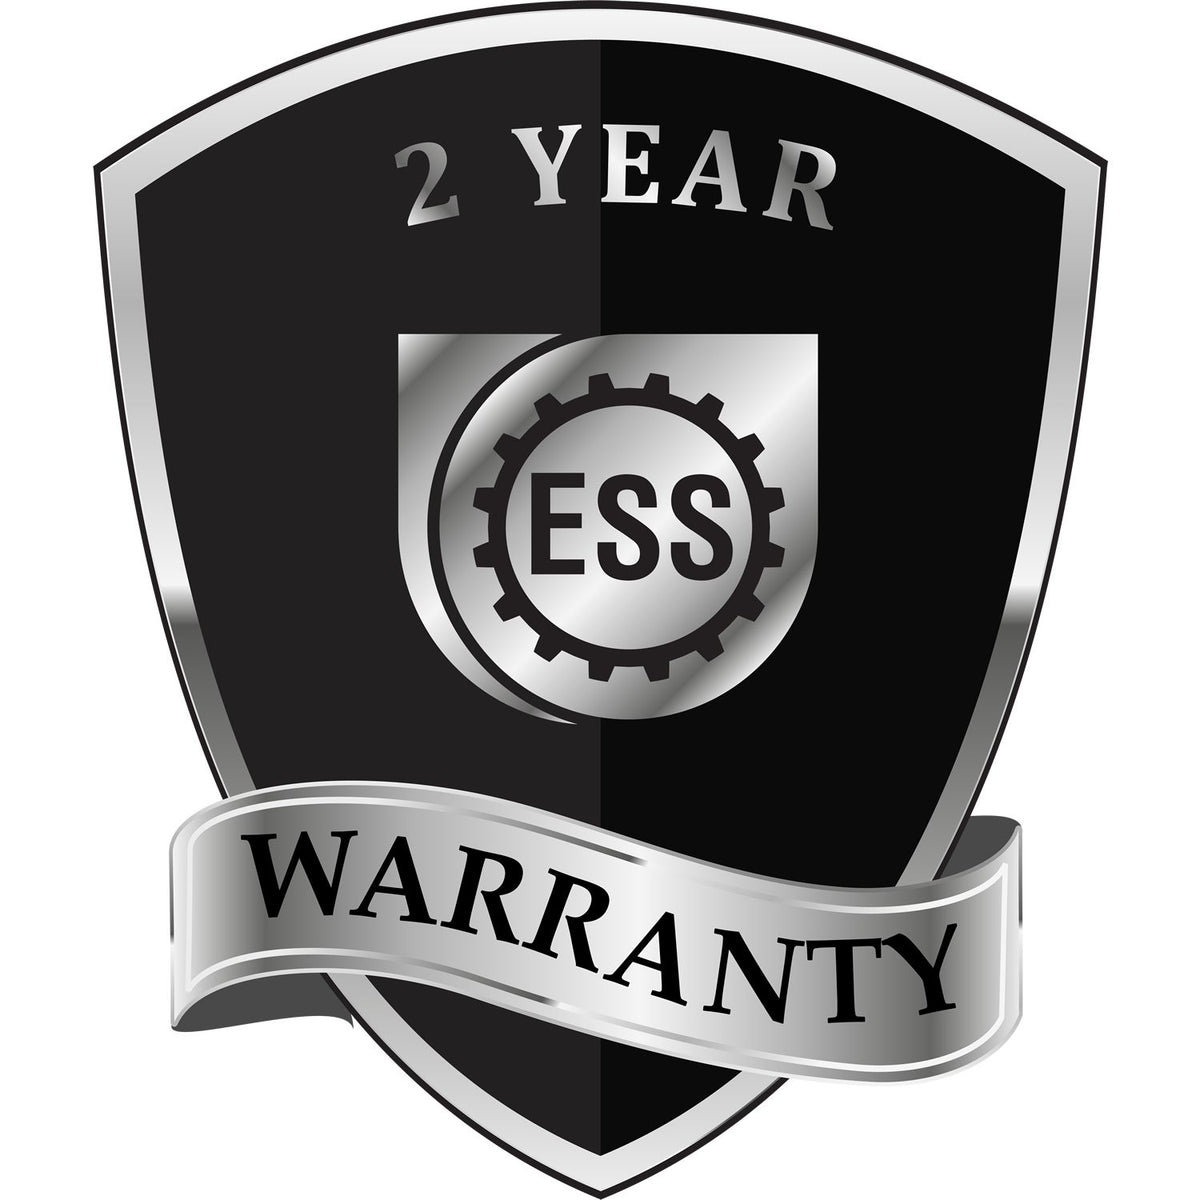 A black and silver badge or emblem showing warranty information for the Long Reach New York Geology Seal